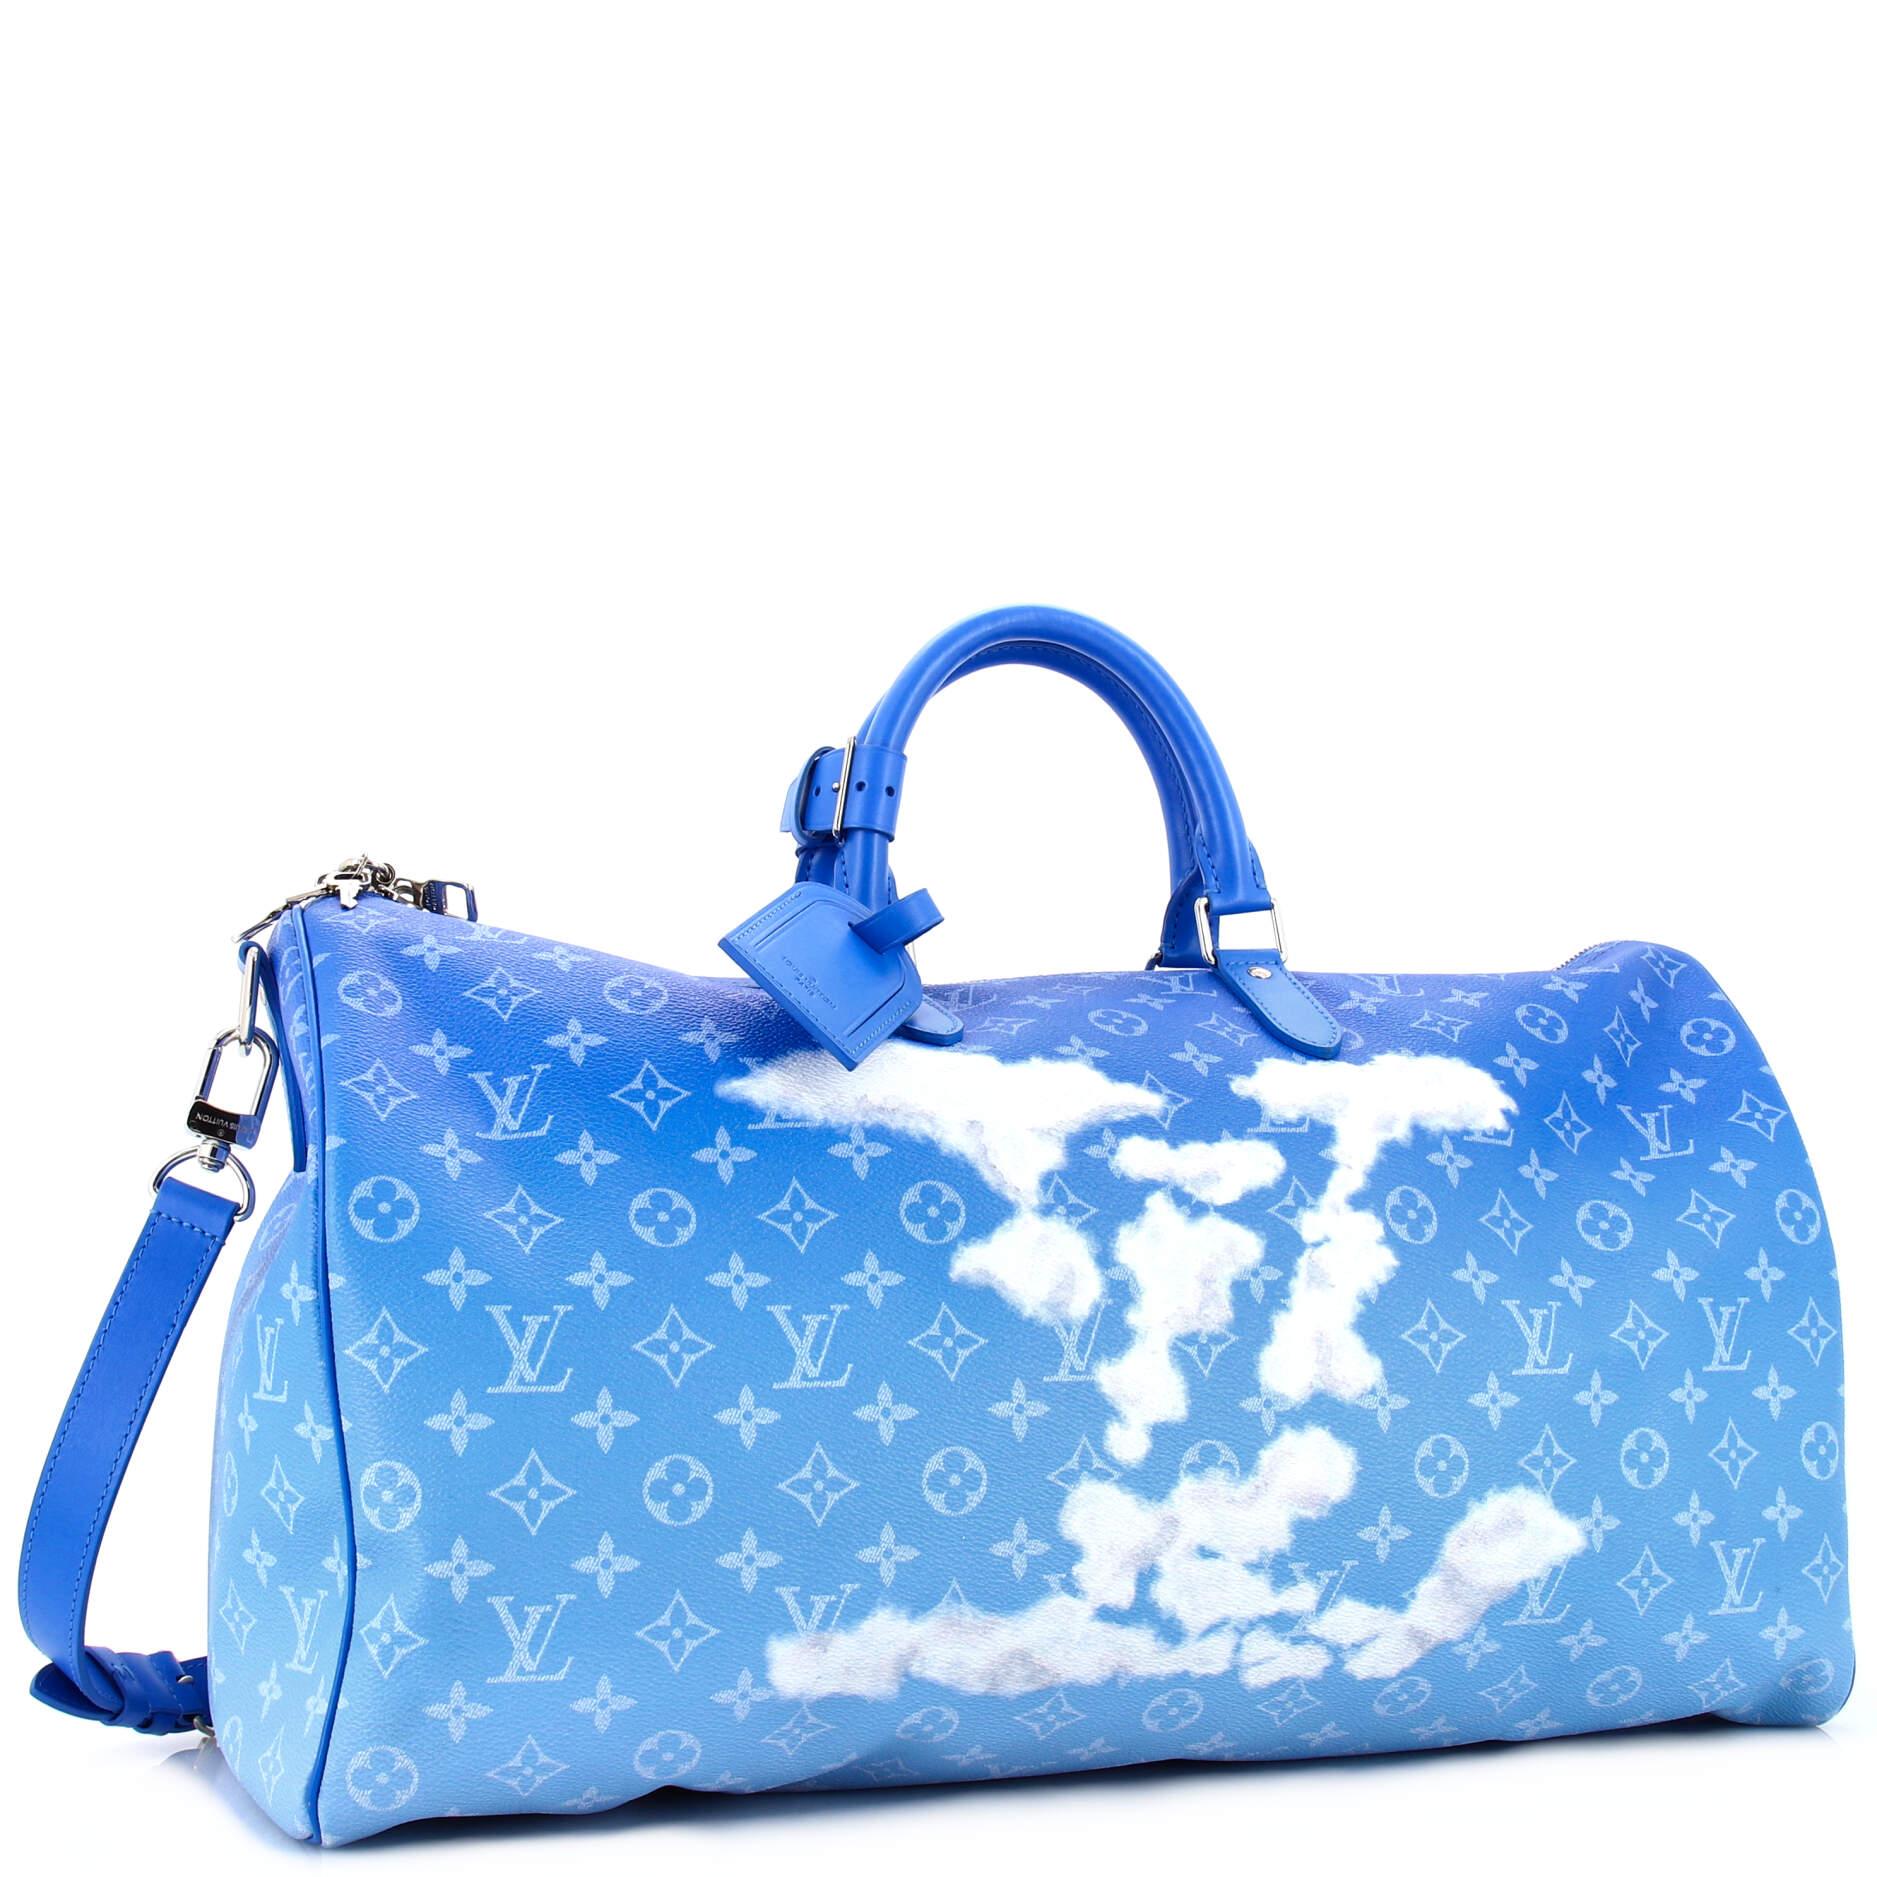 Clouds Keepall - For Sale on 1stDibs